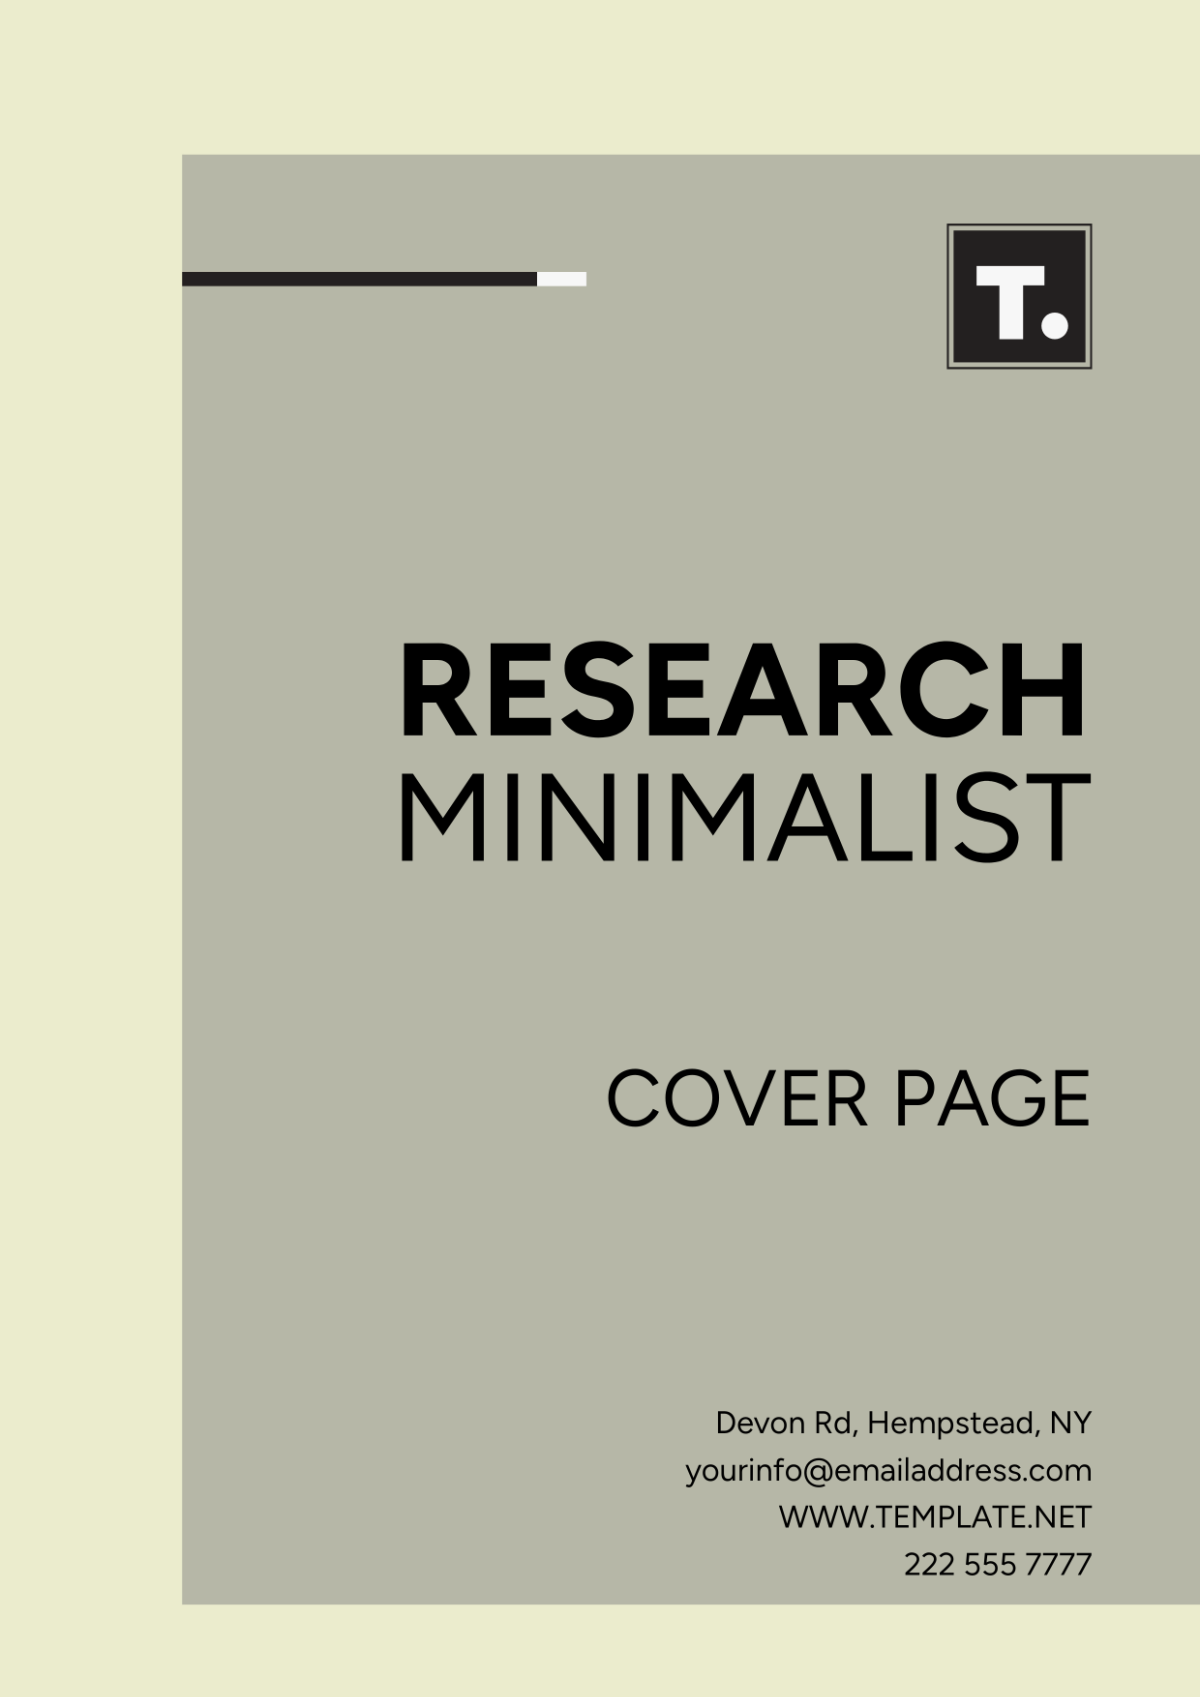 Research Minimalist Cover Page